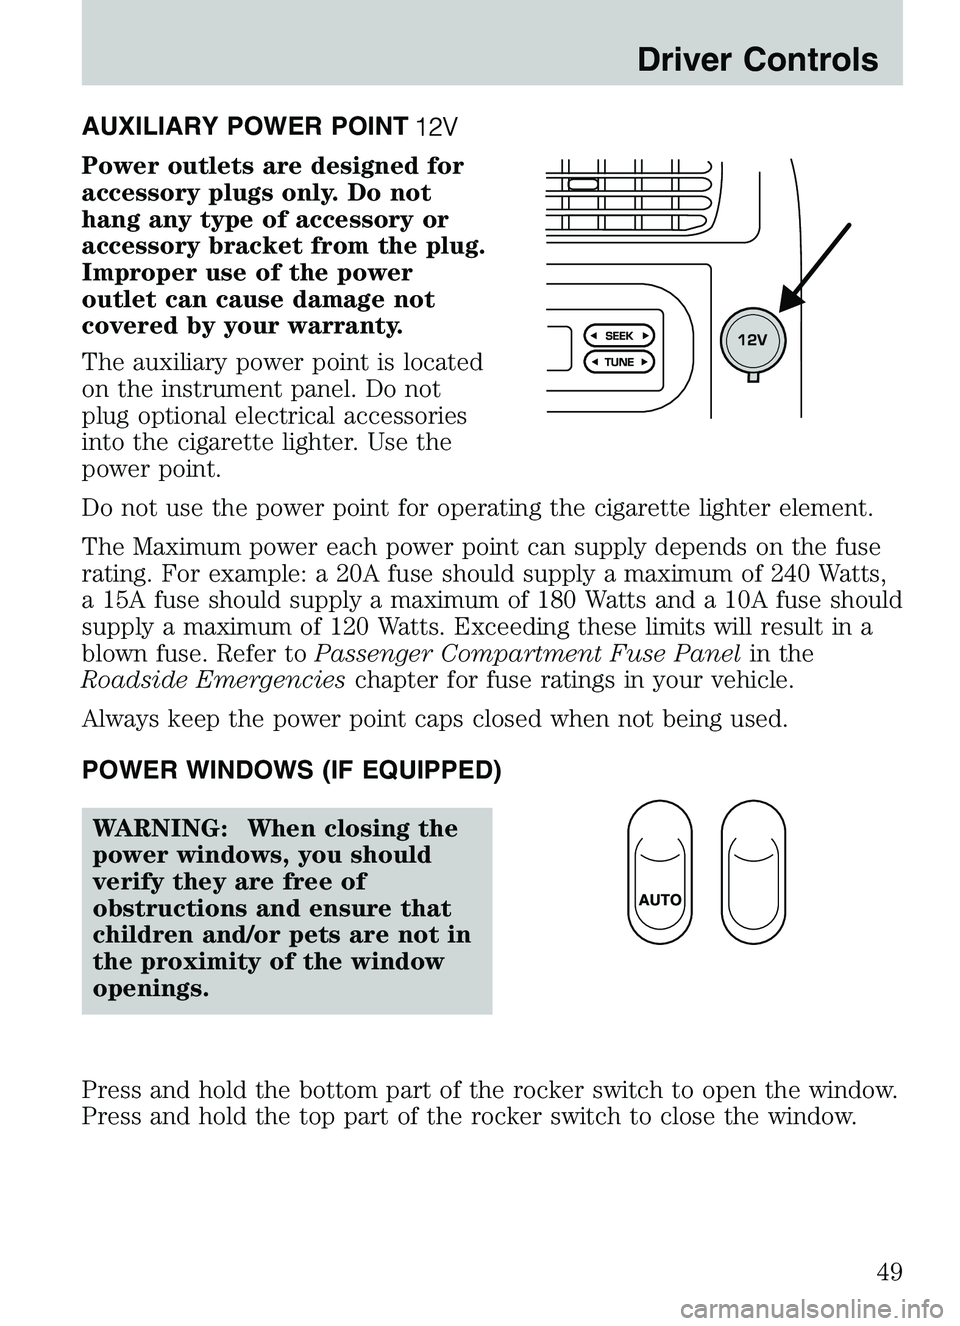 MAZDA MODEL B4000 4WD 2003  Owners Manual AUXILIARY POWER POINT
Power outlets are designed for
accessory plugs only. Do not
hang any type of accessory or
accessory bracket from the plug.
Improper use of the power
outlet can cause damage not
c